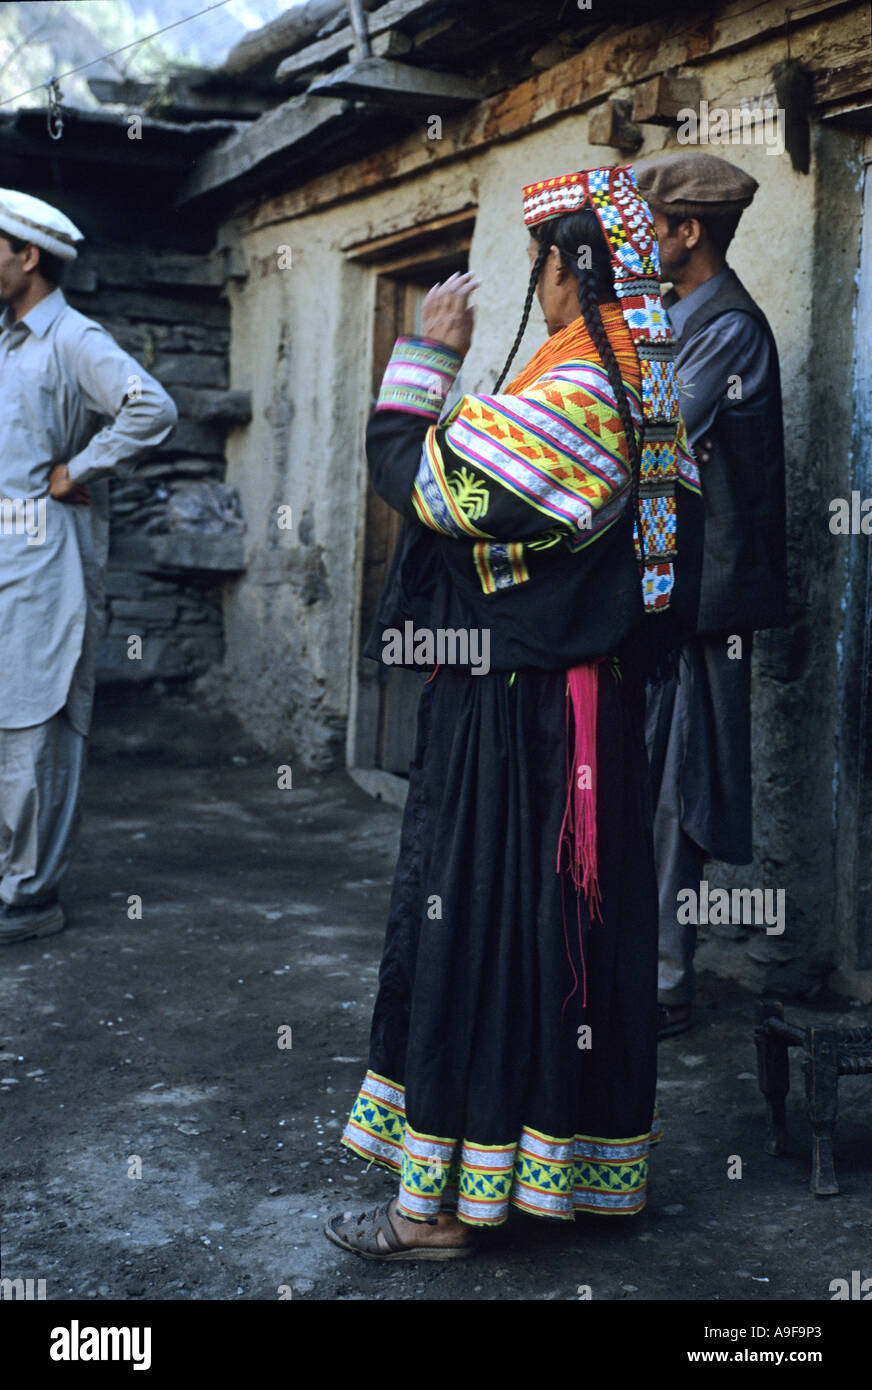 Kalash woman in traditional dress with two local men behind Bumboret village Kalash valley North West Frontier region Pakistan Stock Photo